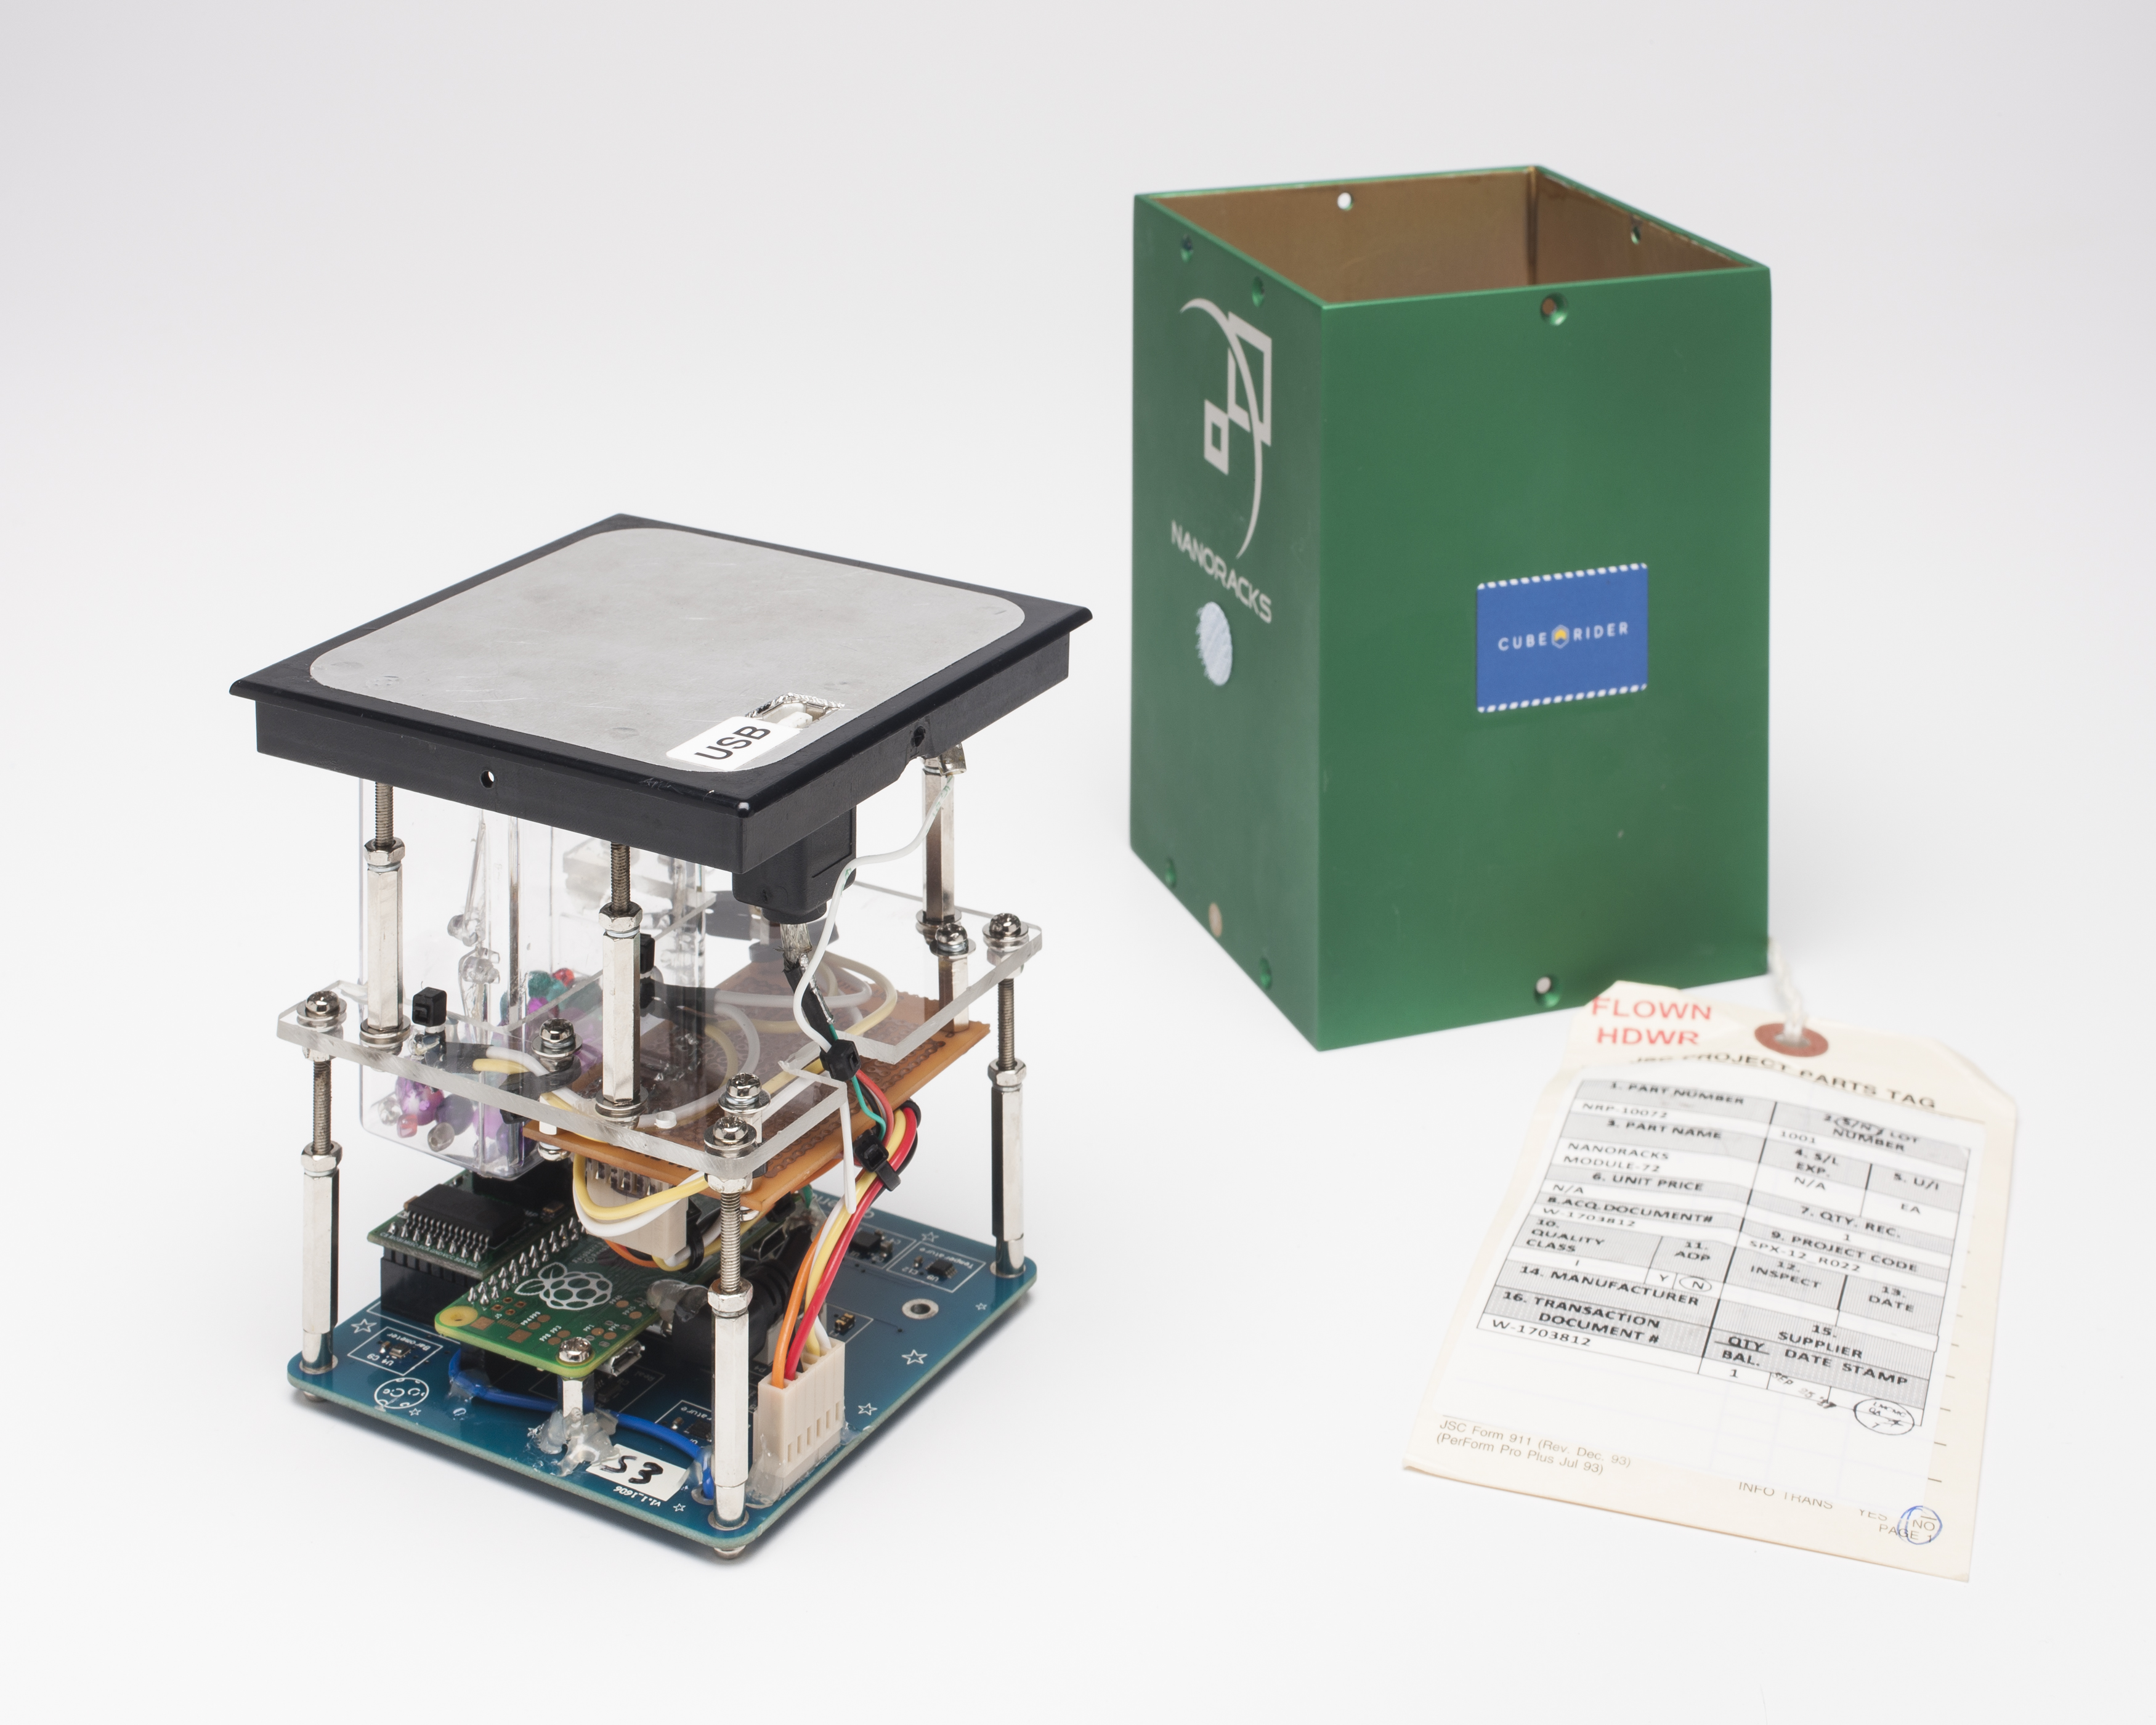 A rectangular unit about 15cm high, comprising a series of electronics. On the right is a green metal case for the device, and attached to it a paper label stamped with the words 'FLOWN HDWR'.